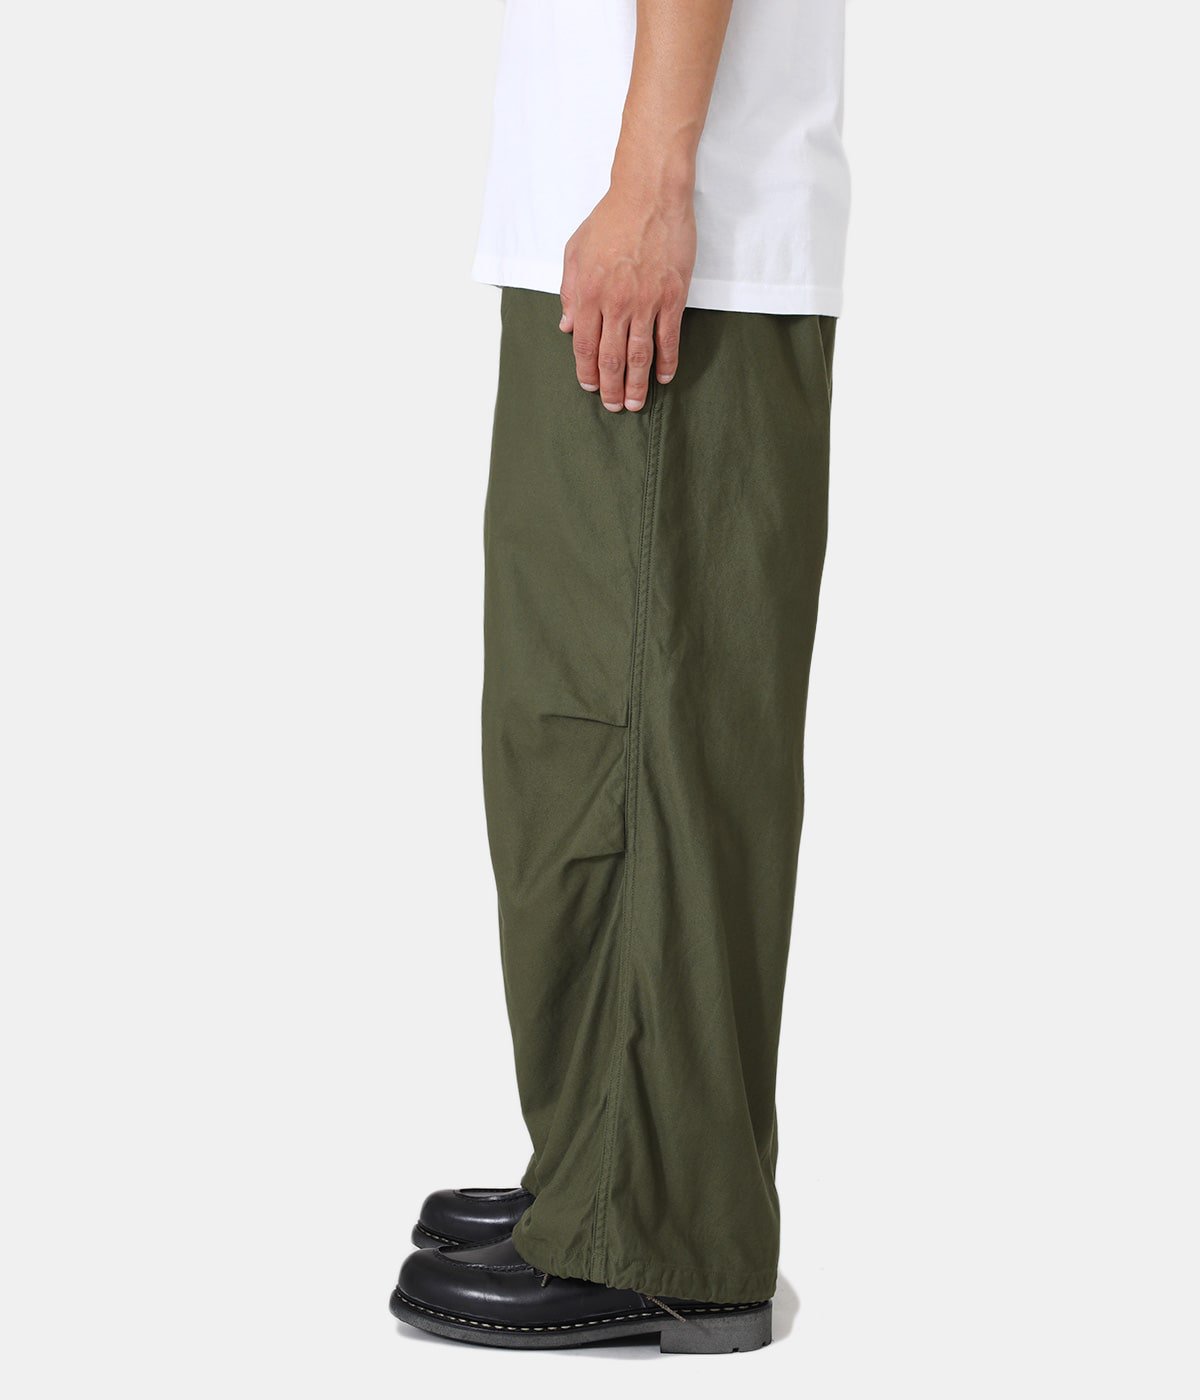 LOOSE FIT ARMY TROUSER | orSlow(オアスロウ) / パンツ ボトムス 